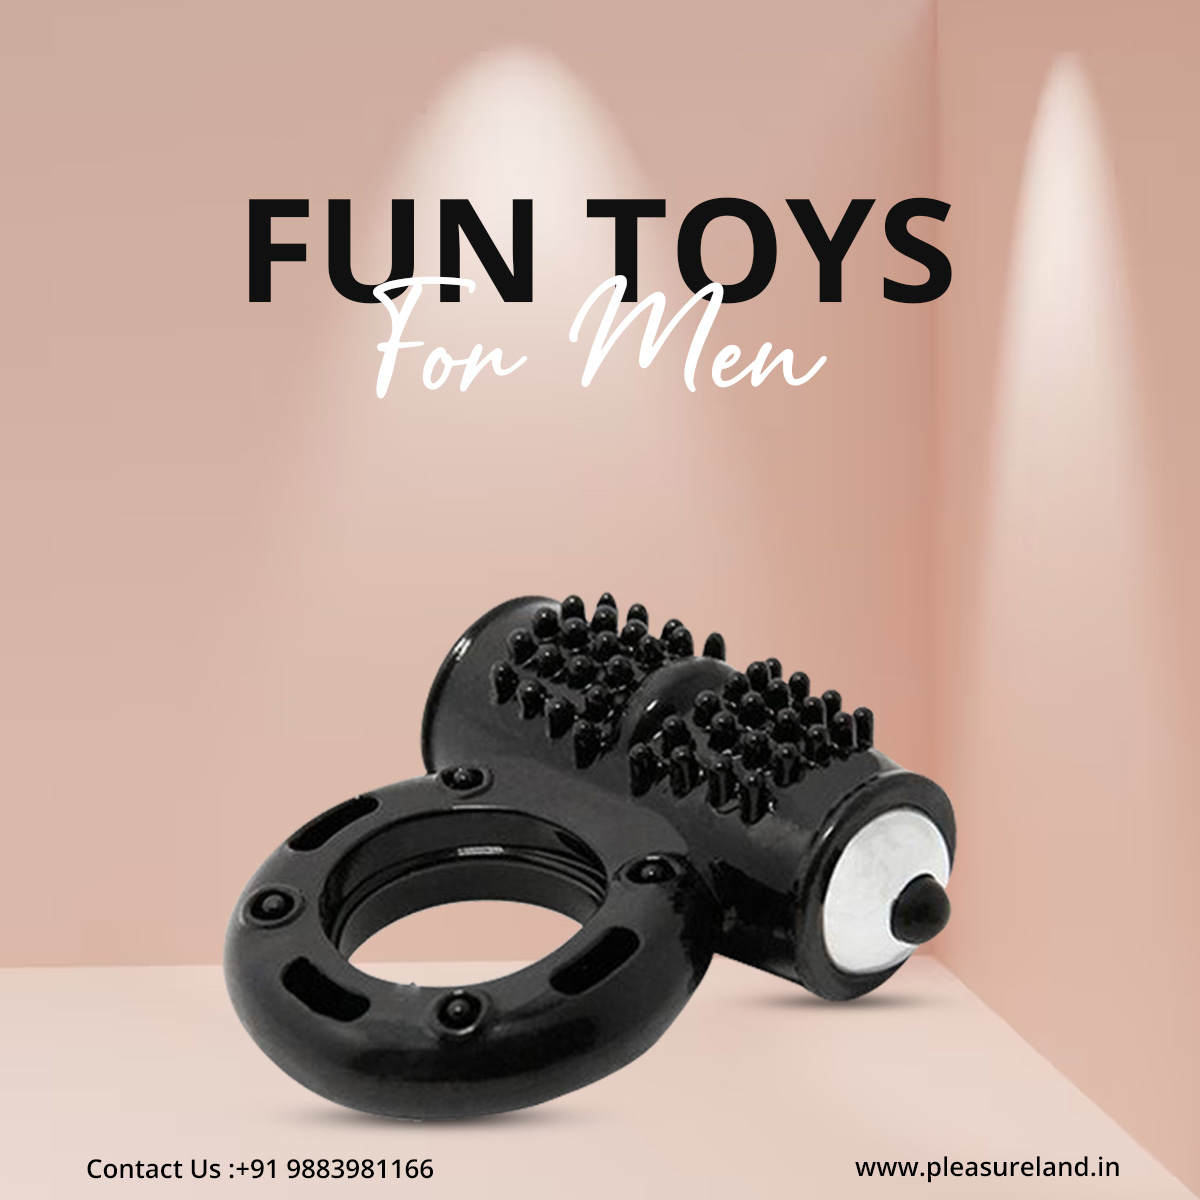 Forget the old ways to make love with your partner, try our newest adult toys to enrich the relationship. Check out our online store to purchase the best collection.
Call/WhatsApp: +919883981166
#AdultingAndStuff #adultadvertising #adultenterteinment #healthandwellness #Online